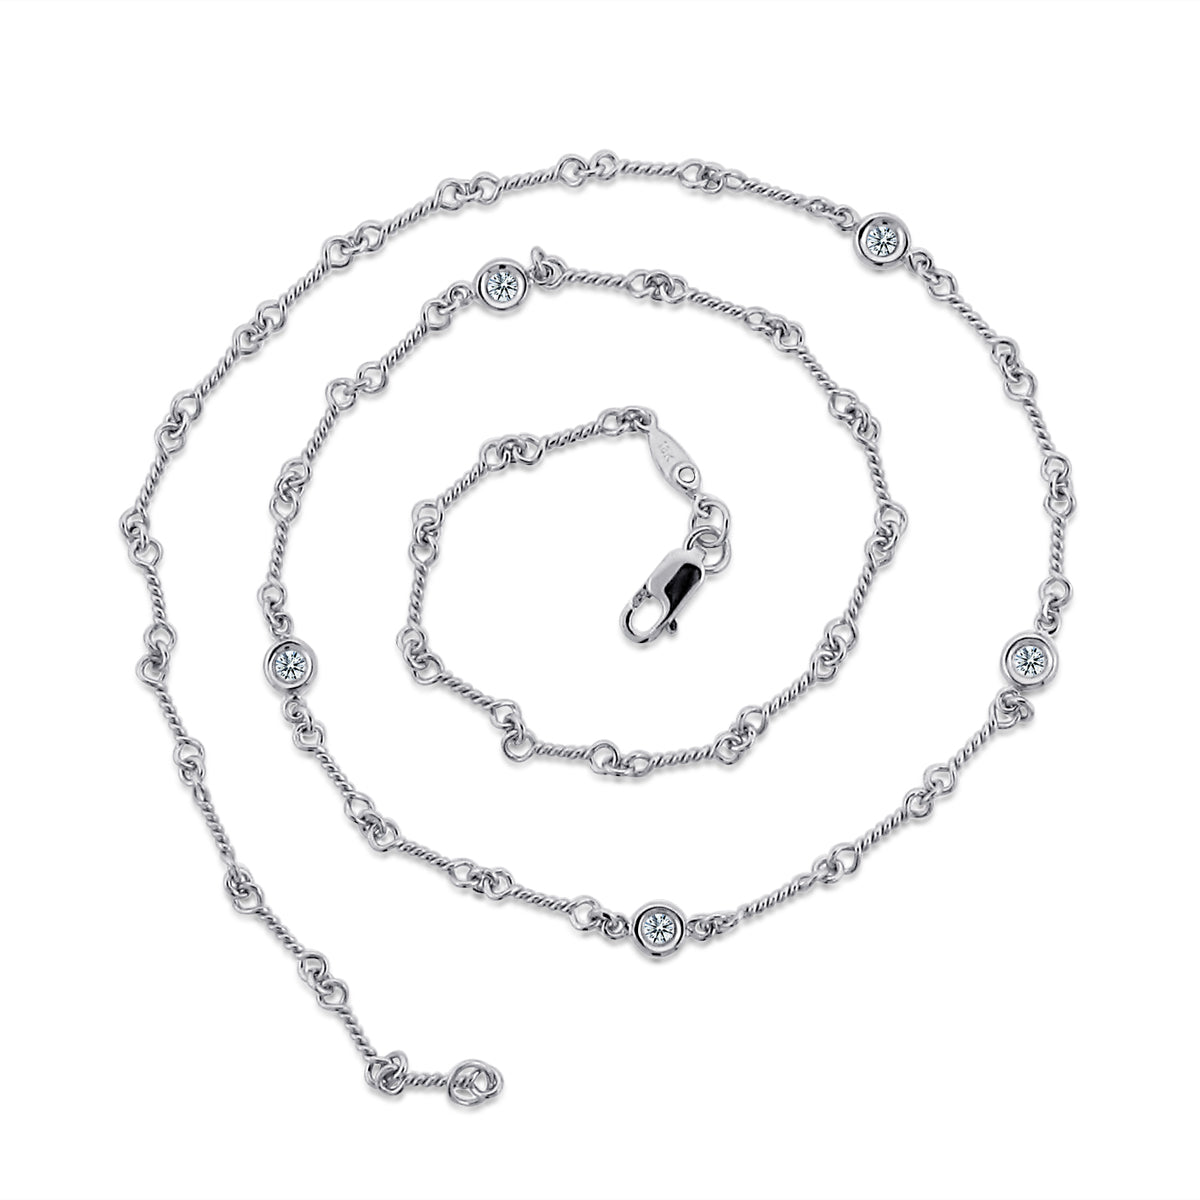 ROBERTO COIN 18K WHITE GOLD 0.20CT SI/G DIAMOND  STATION NECKLACE FROM THE DIAMONDS BY THE INCH COLLECTION